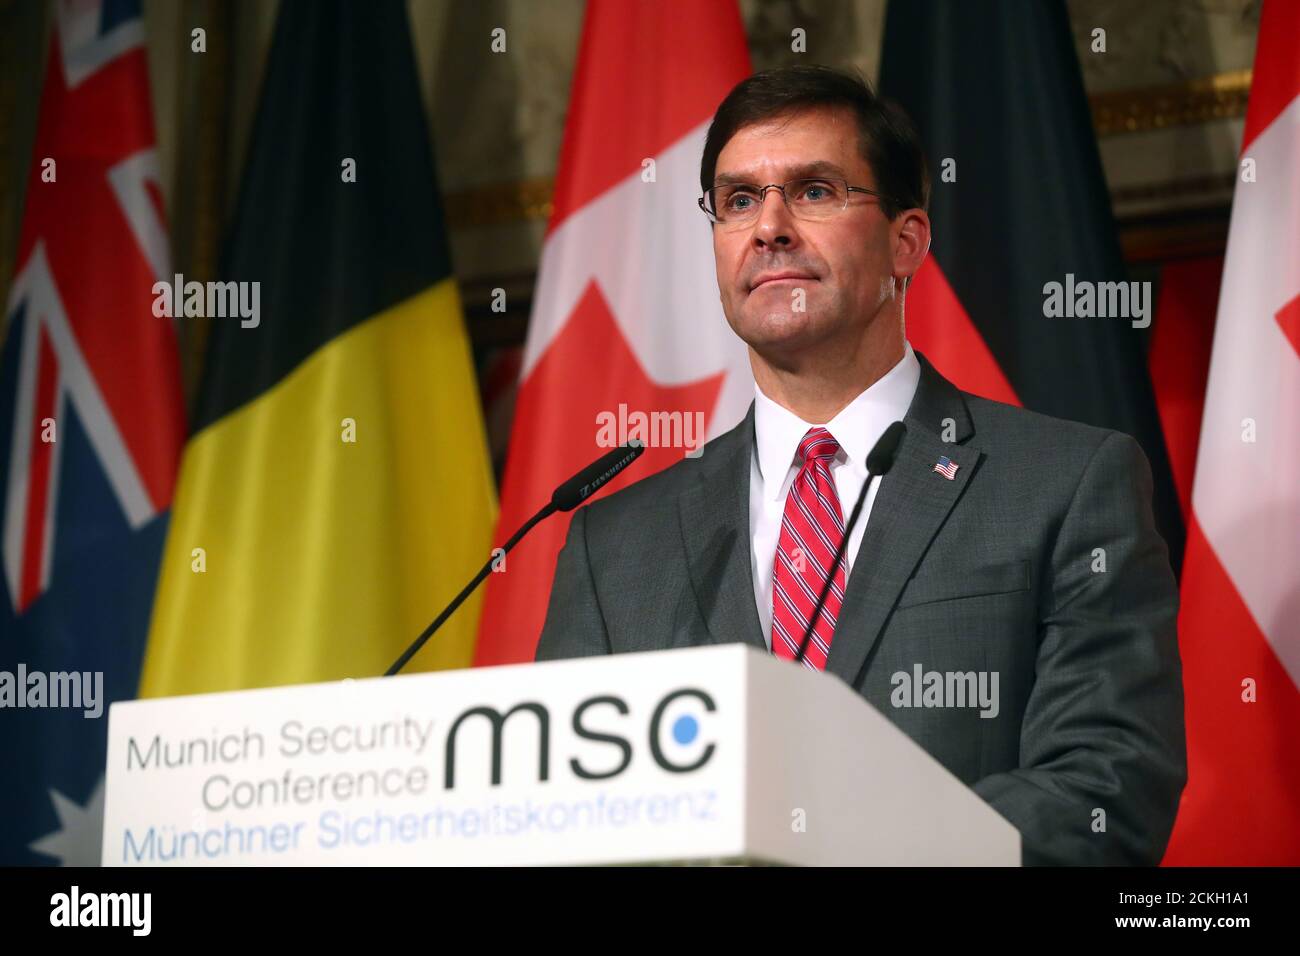 U.S. Defense Secretary Mark Esper reacts during a joint news conference with German Defense Minister Annegret Kramp-Karrenbauer (not pictured) after a meeting on anti-ISIS coalition in Munich, Germany, February 14, 2020. REUTERS/Michael Dalder Stock Photo